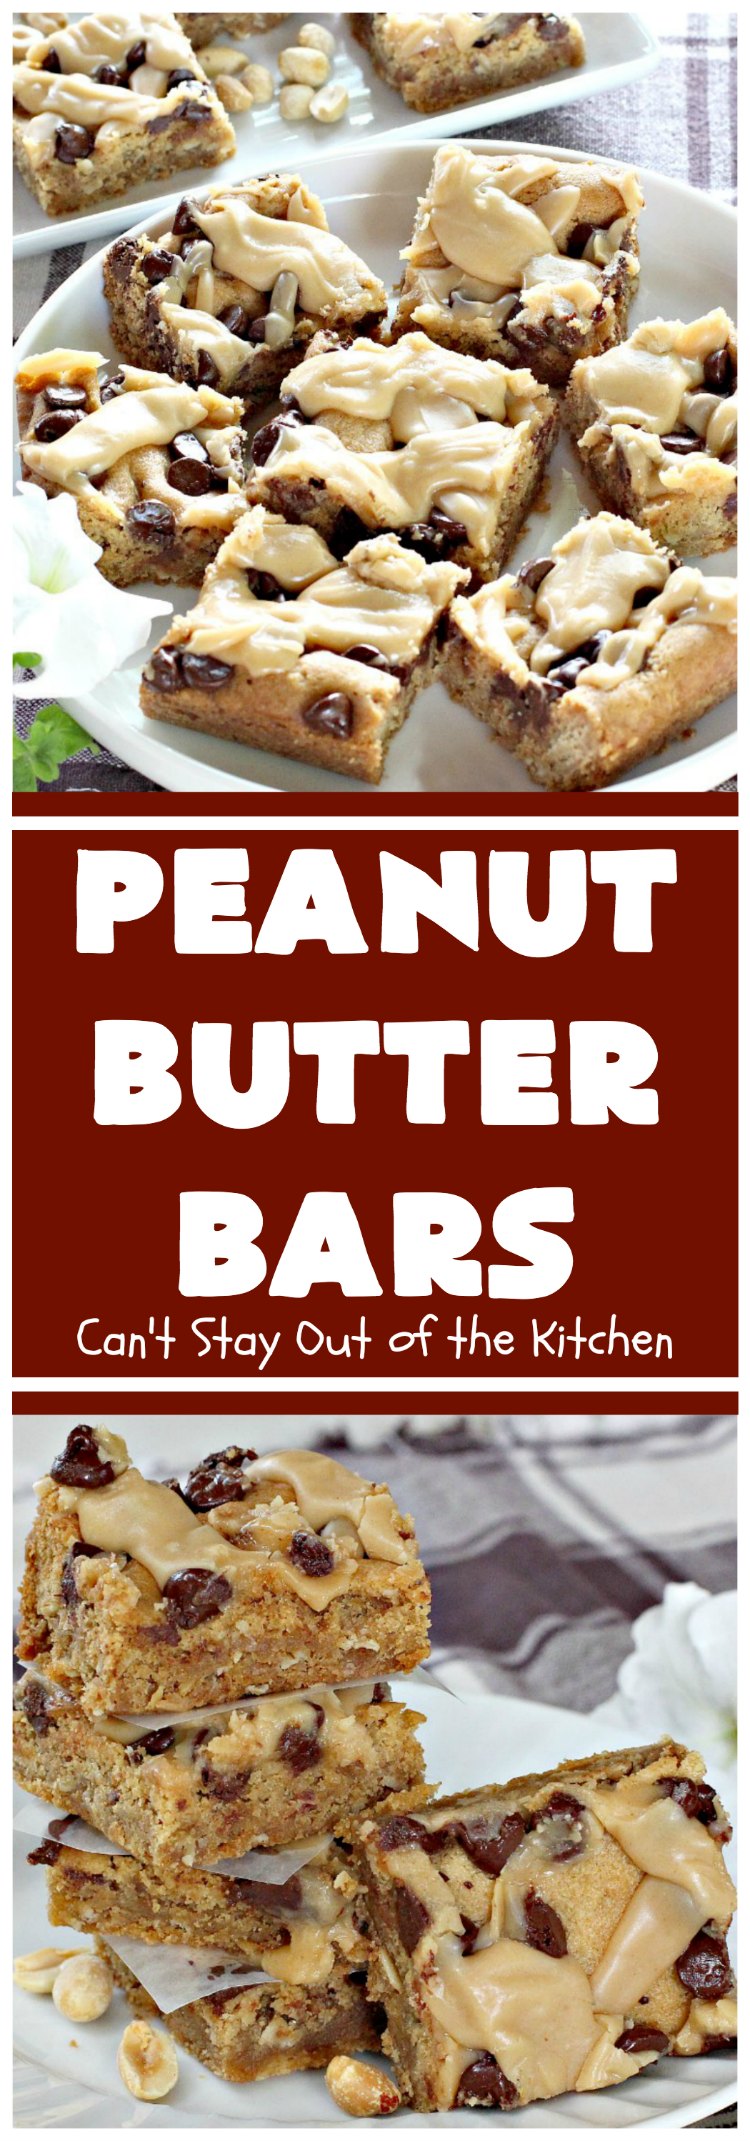 Peanut Butter Bars | Can't Stay Out of the Kitchen